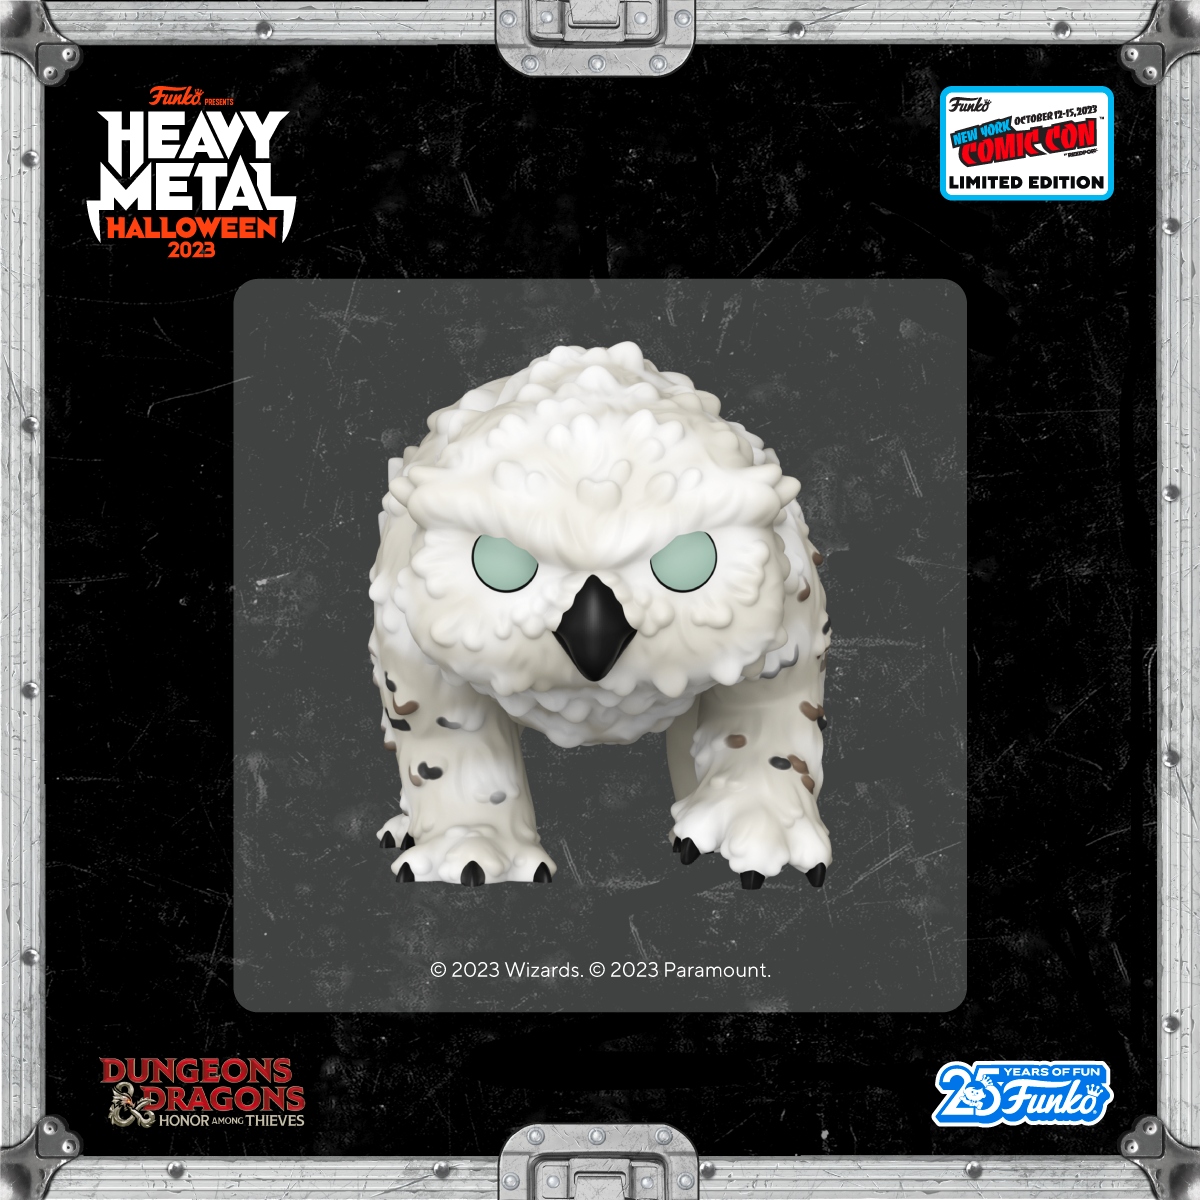 NYCC 2023 exclusive Pop! Owlbear of the Dungeons & Dragons Honor Among Thieves collection.